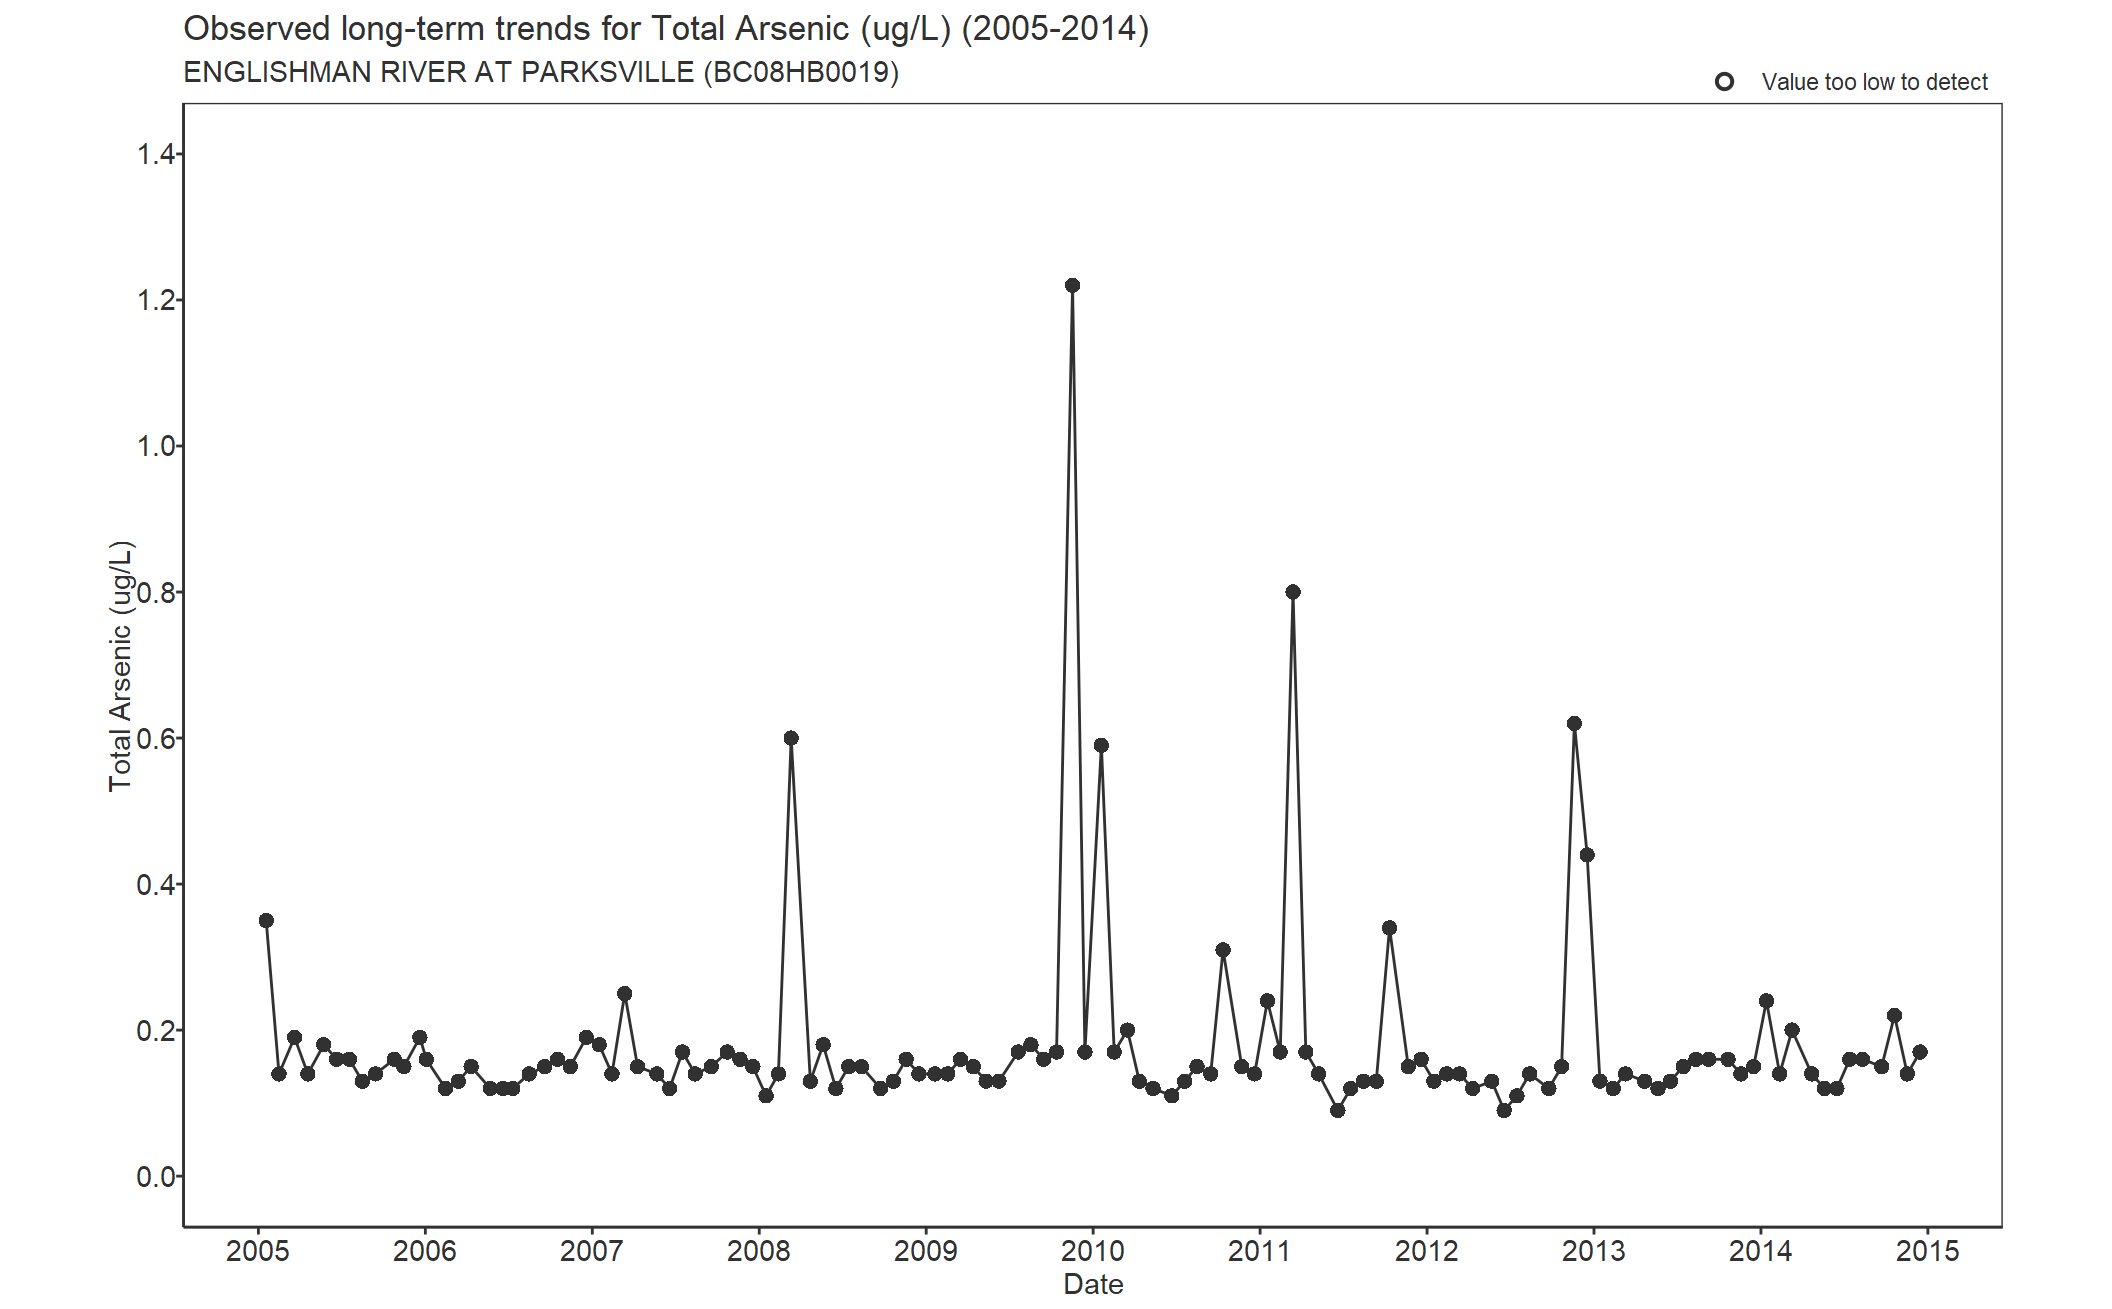 Observed long-term trends for Total Arsenic (2005-2014)